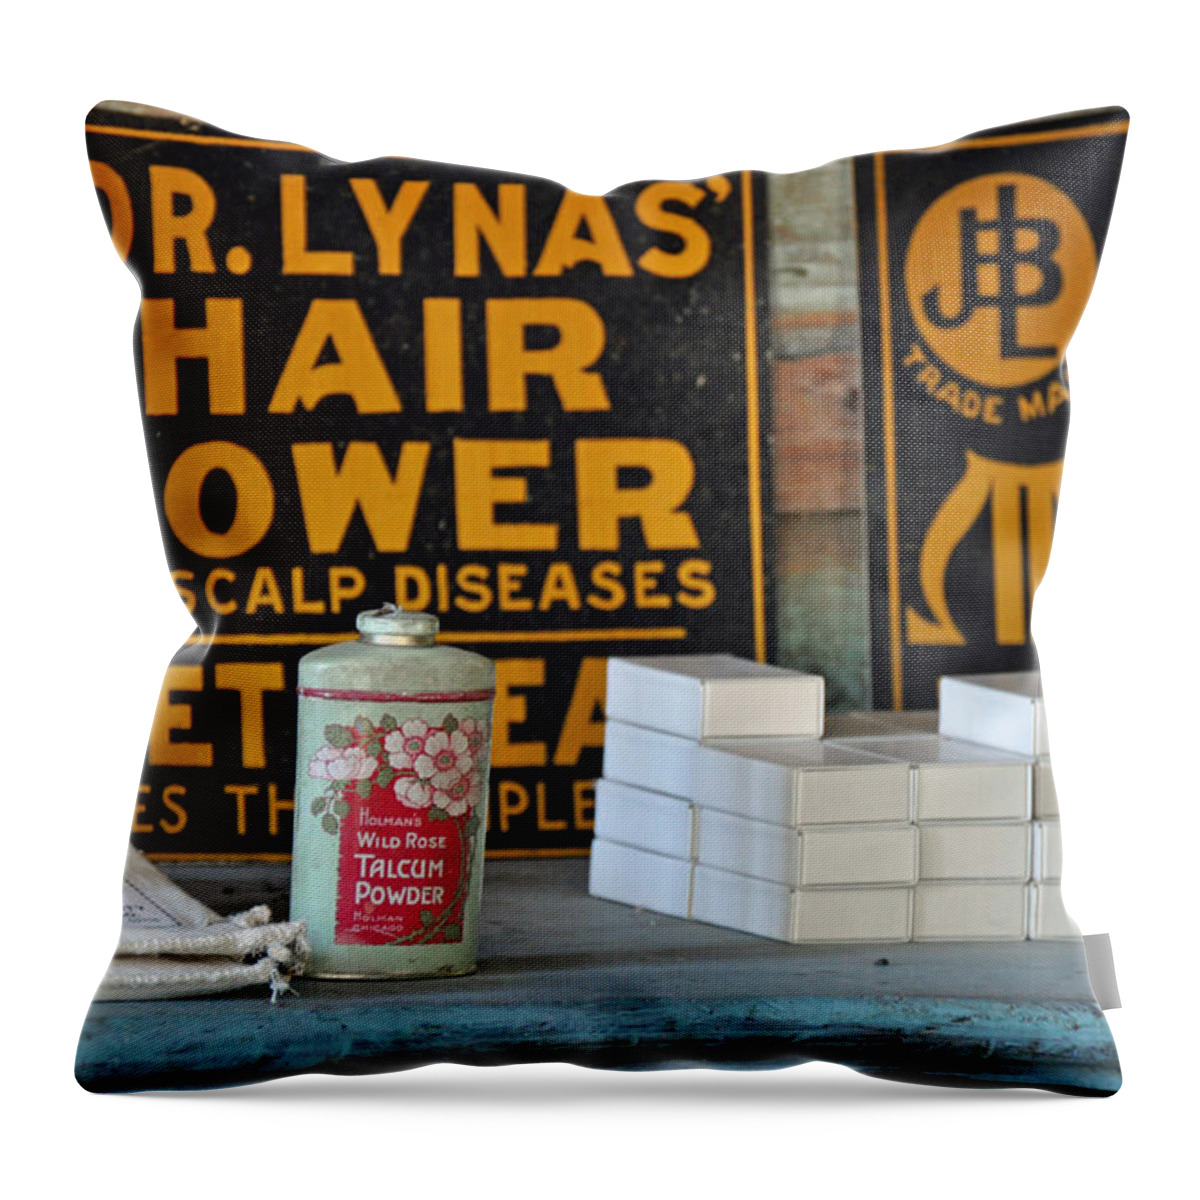 Hair Throw Pillow featuring the photograph Dr. Lyna's Hair Grower by Bruce Gourley